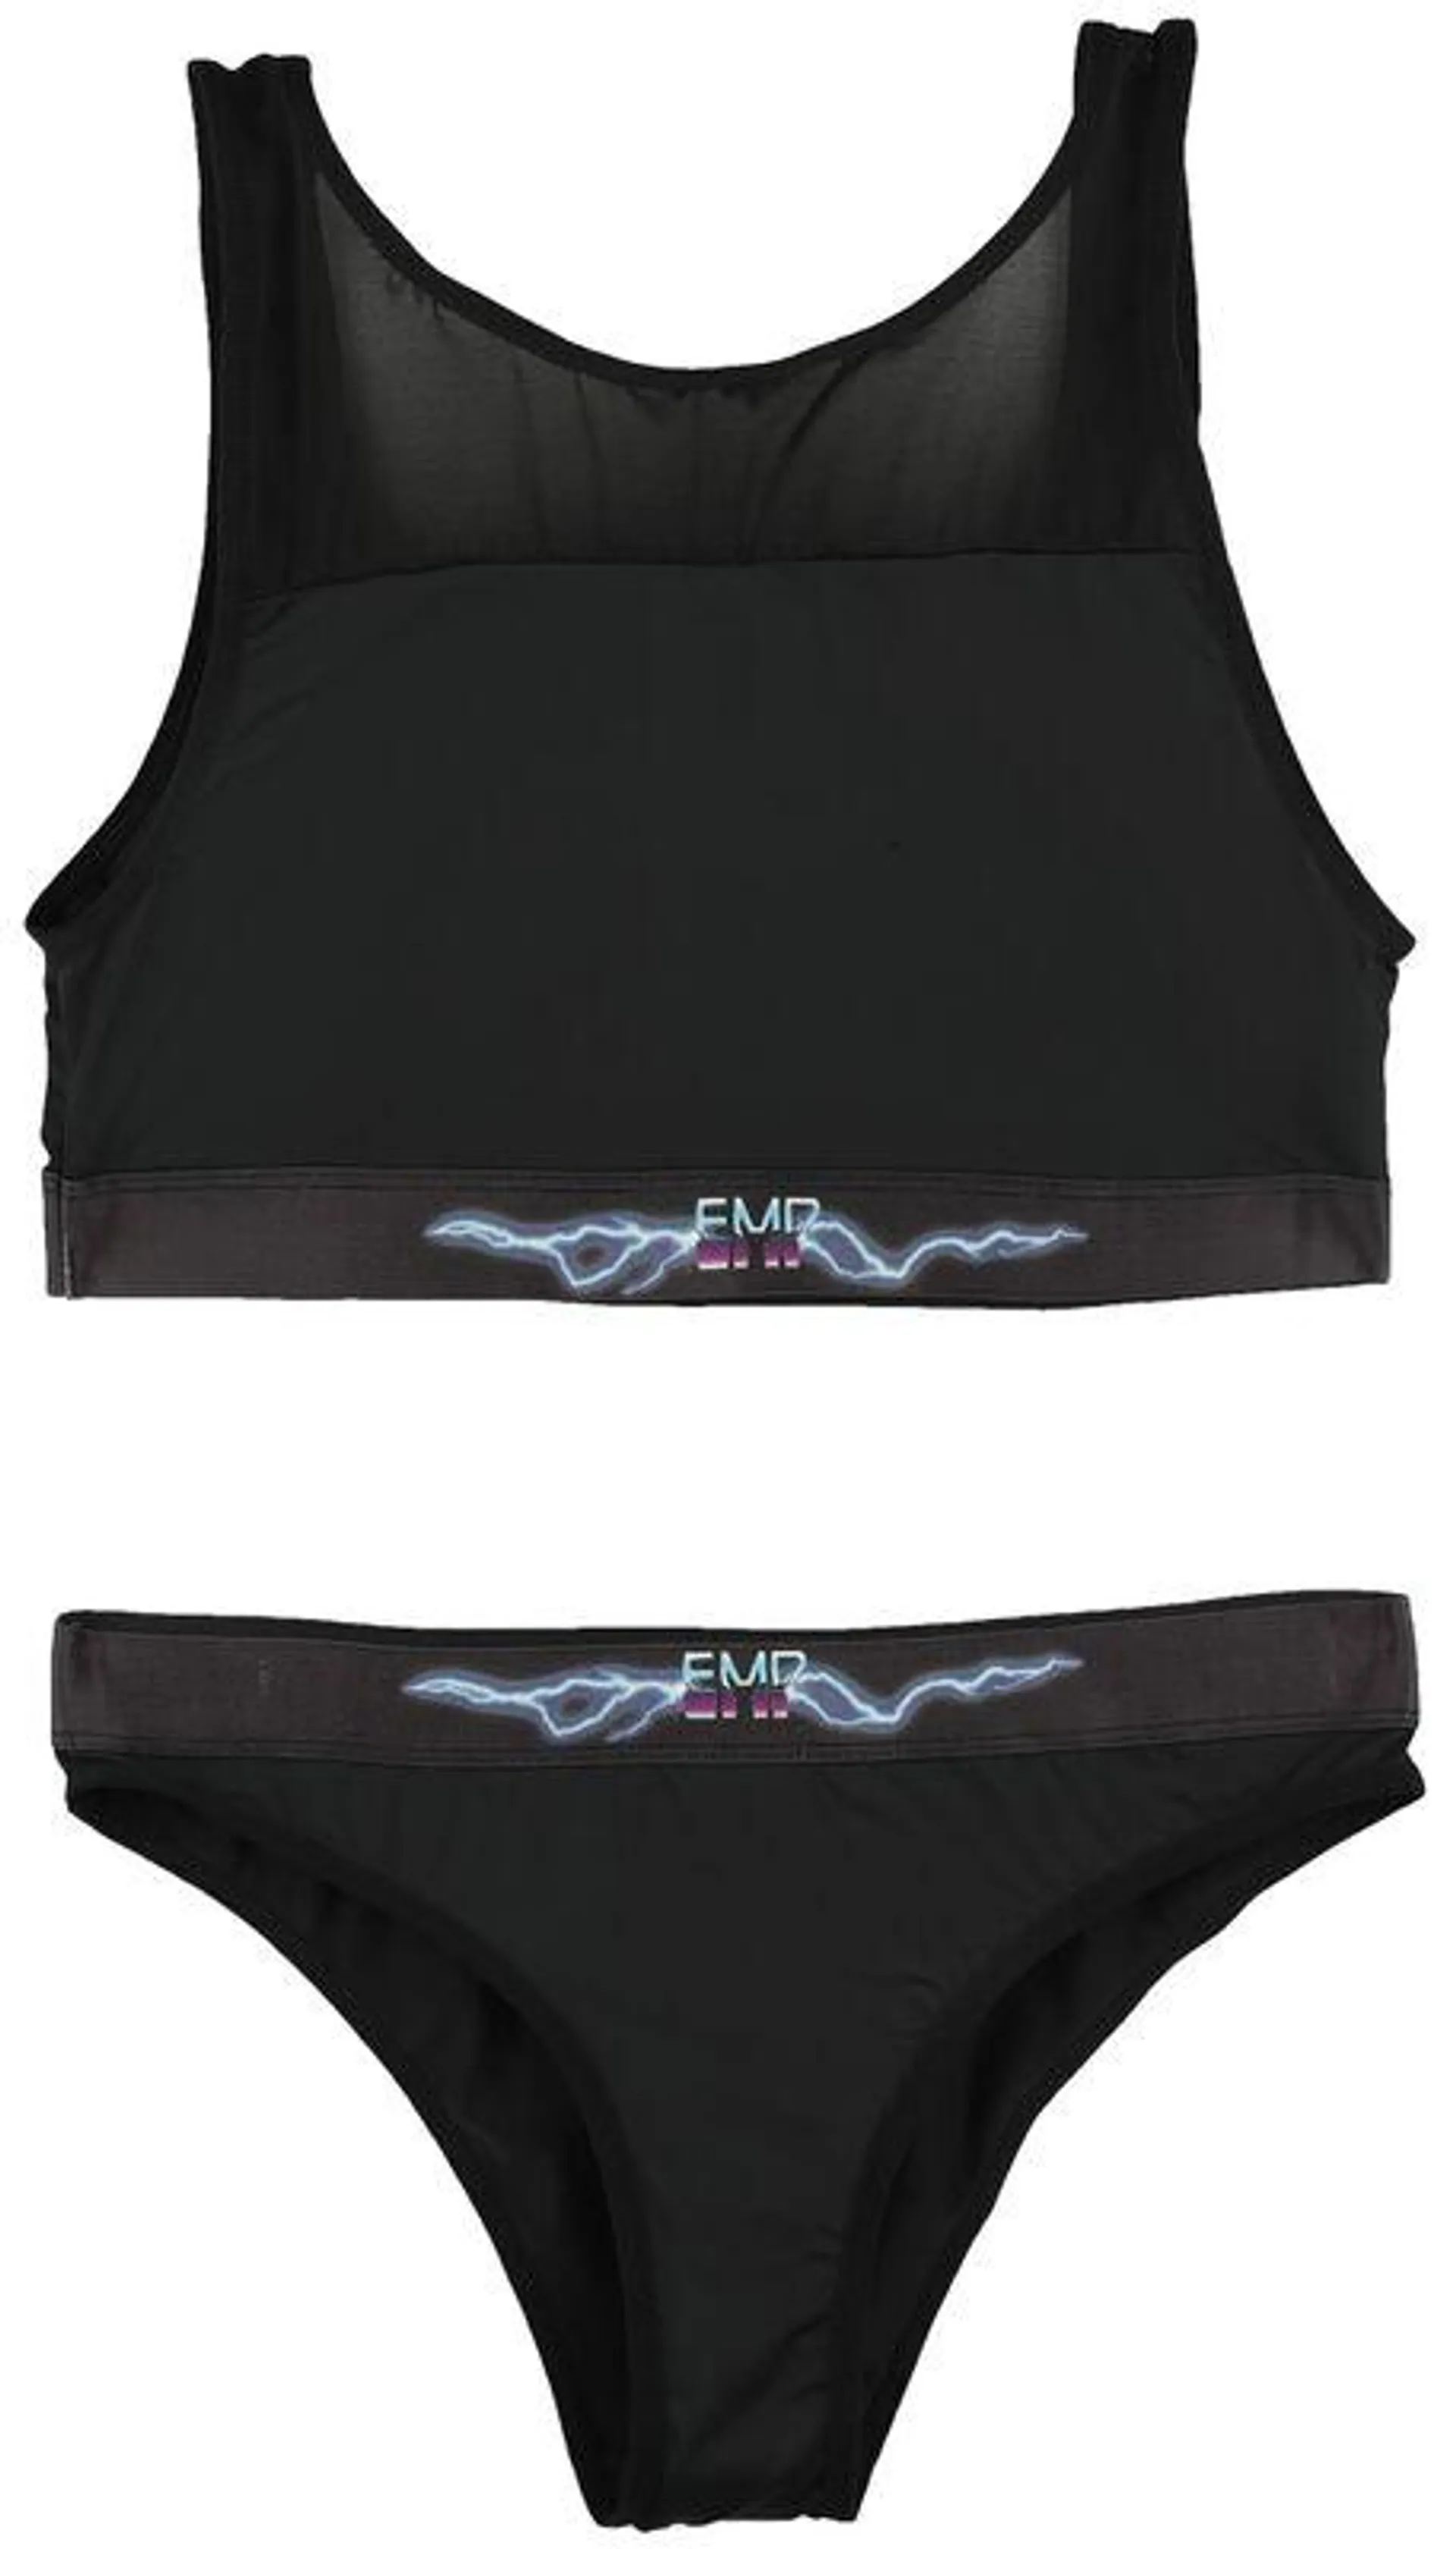 "Bustier and Slip with EMP Retro Logo"